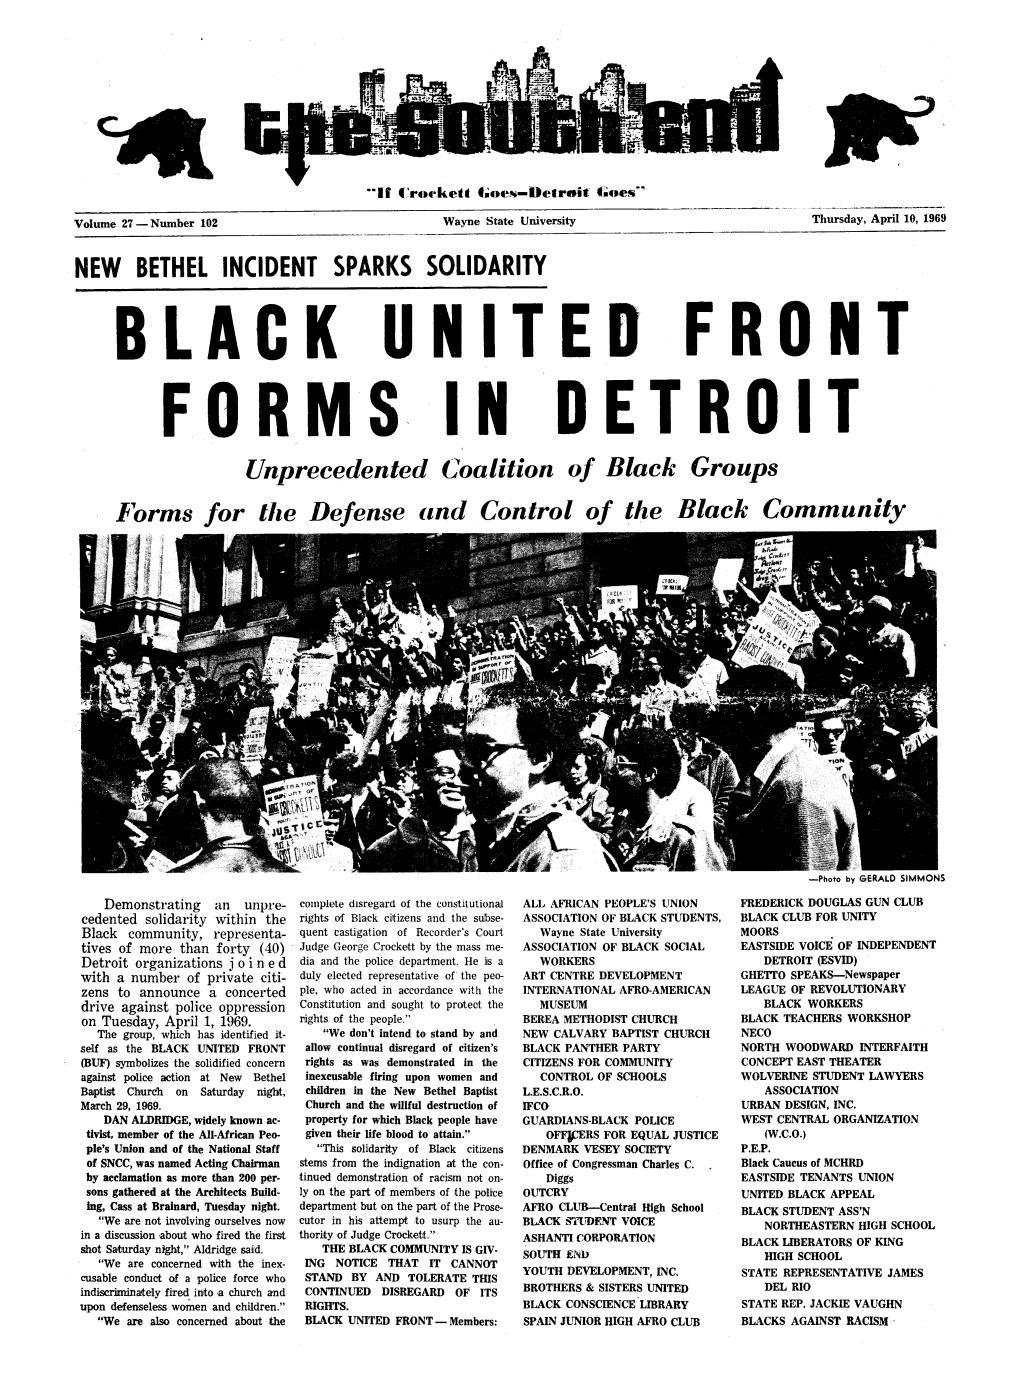 BLACK UNITED FRONT FORMS in DETROIT Unprecedented Coalition of Black Groups Forms for the Defense Ccnd Control of the Black Comrreunity